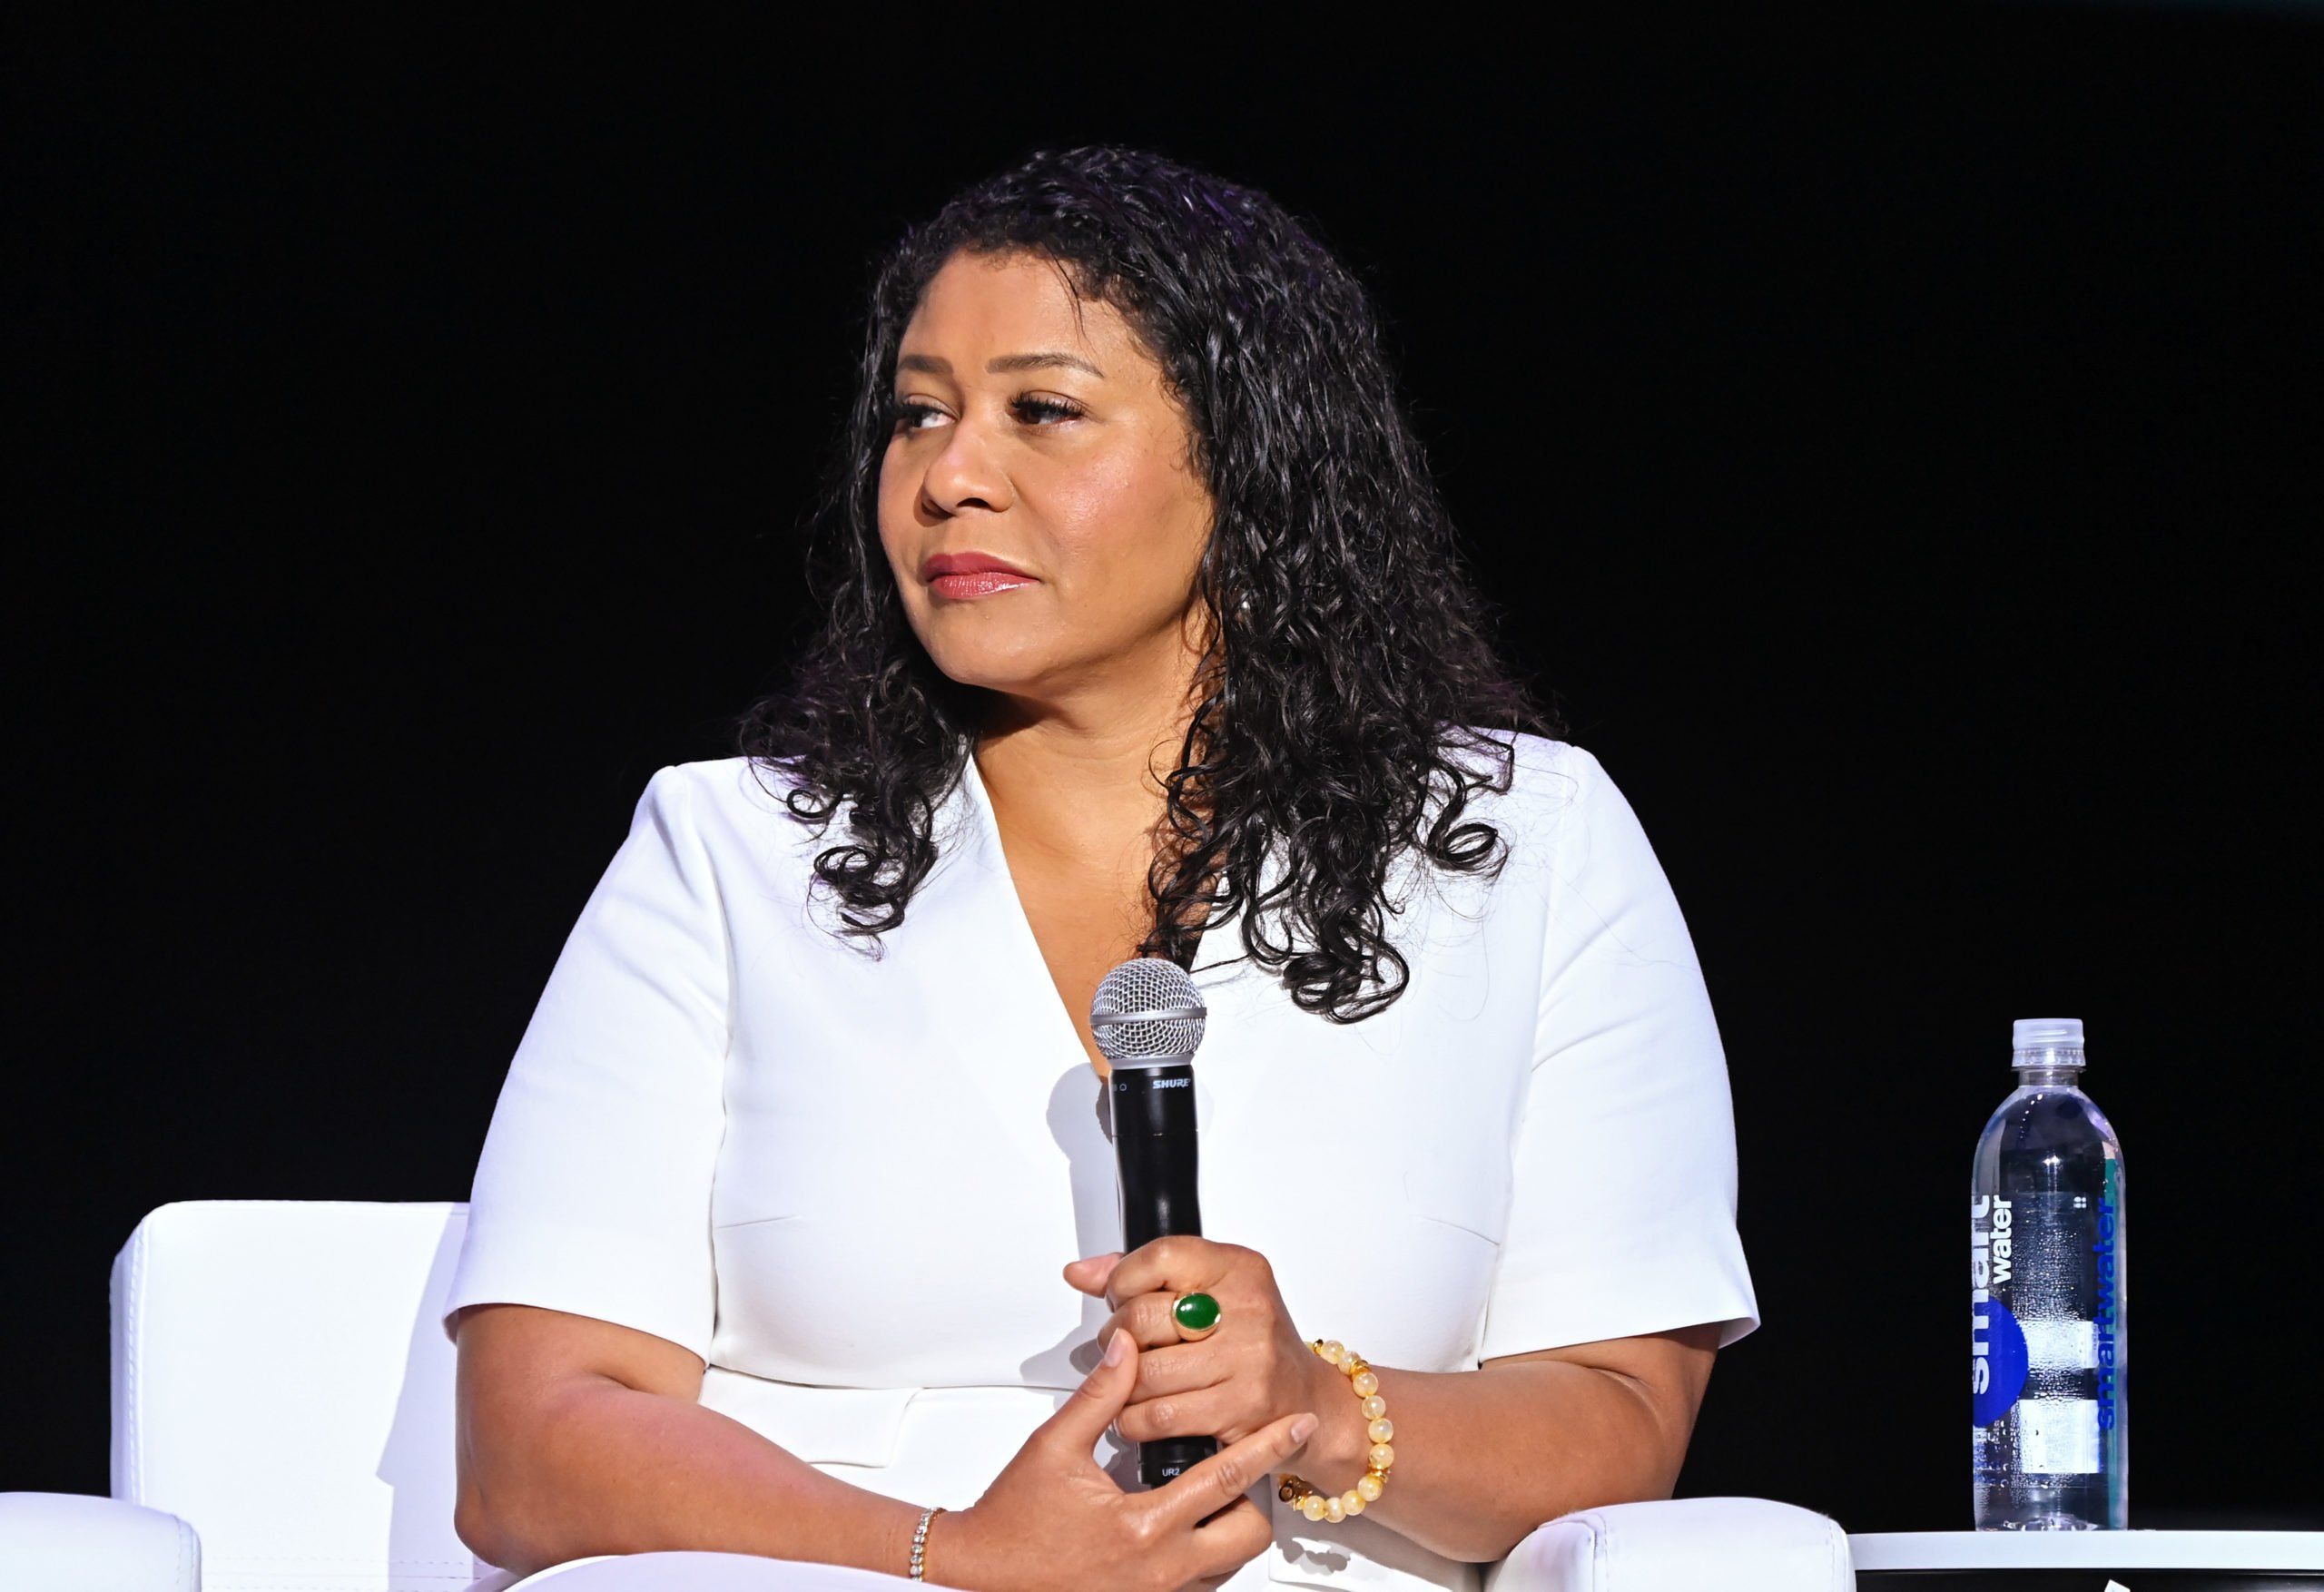 NEW ORLEANS, LOUISIANA - JULY 02: San Francisco Mayor London Breed speaks onstage during the 2022 Essence Festival of Culture at the Ernest N. Morial Convention Center on July 2, 2022 in New Orleans, Louisiana. (Photo by Paras Griffin/Getty Images for Essence)